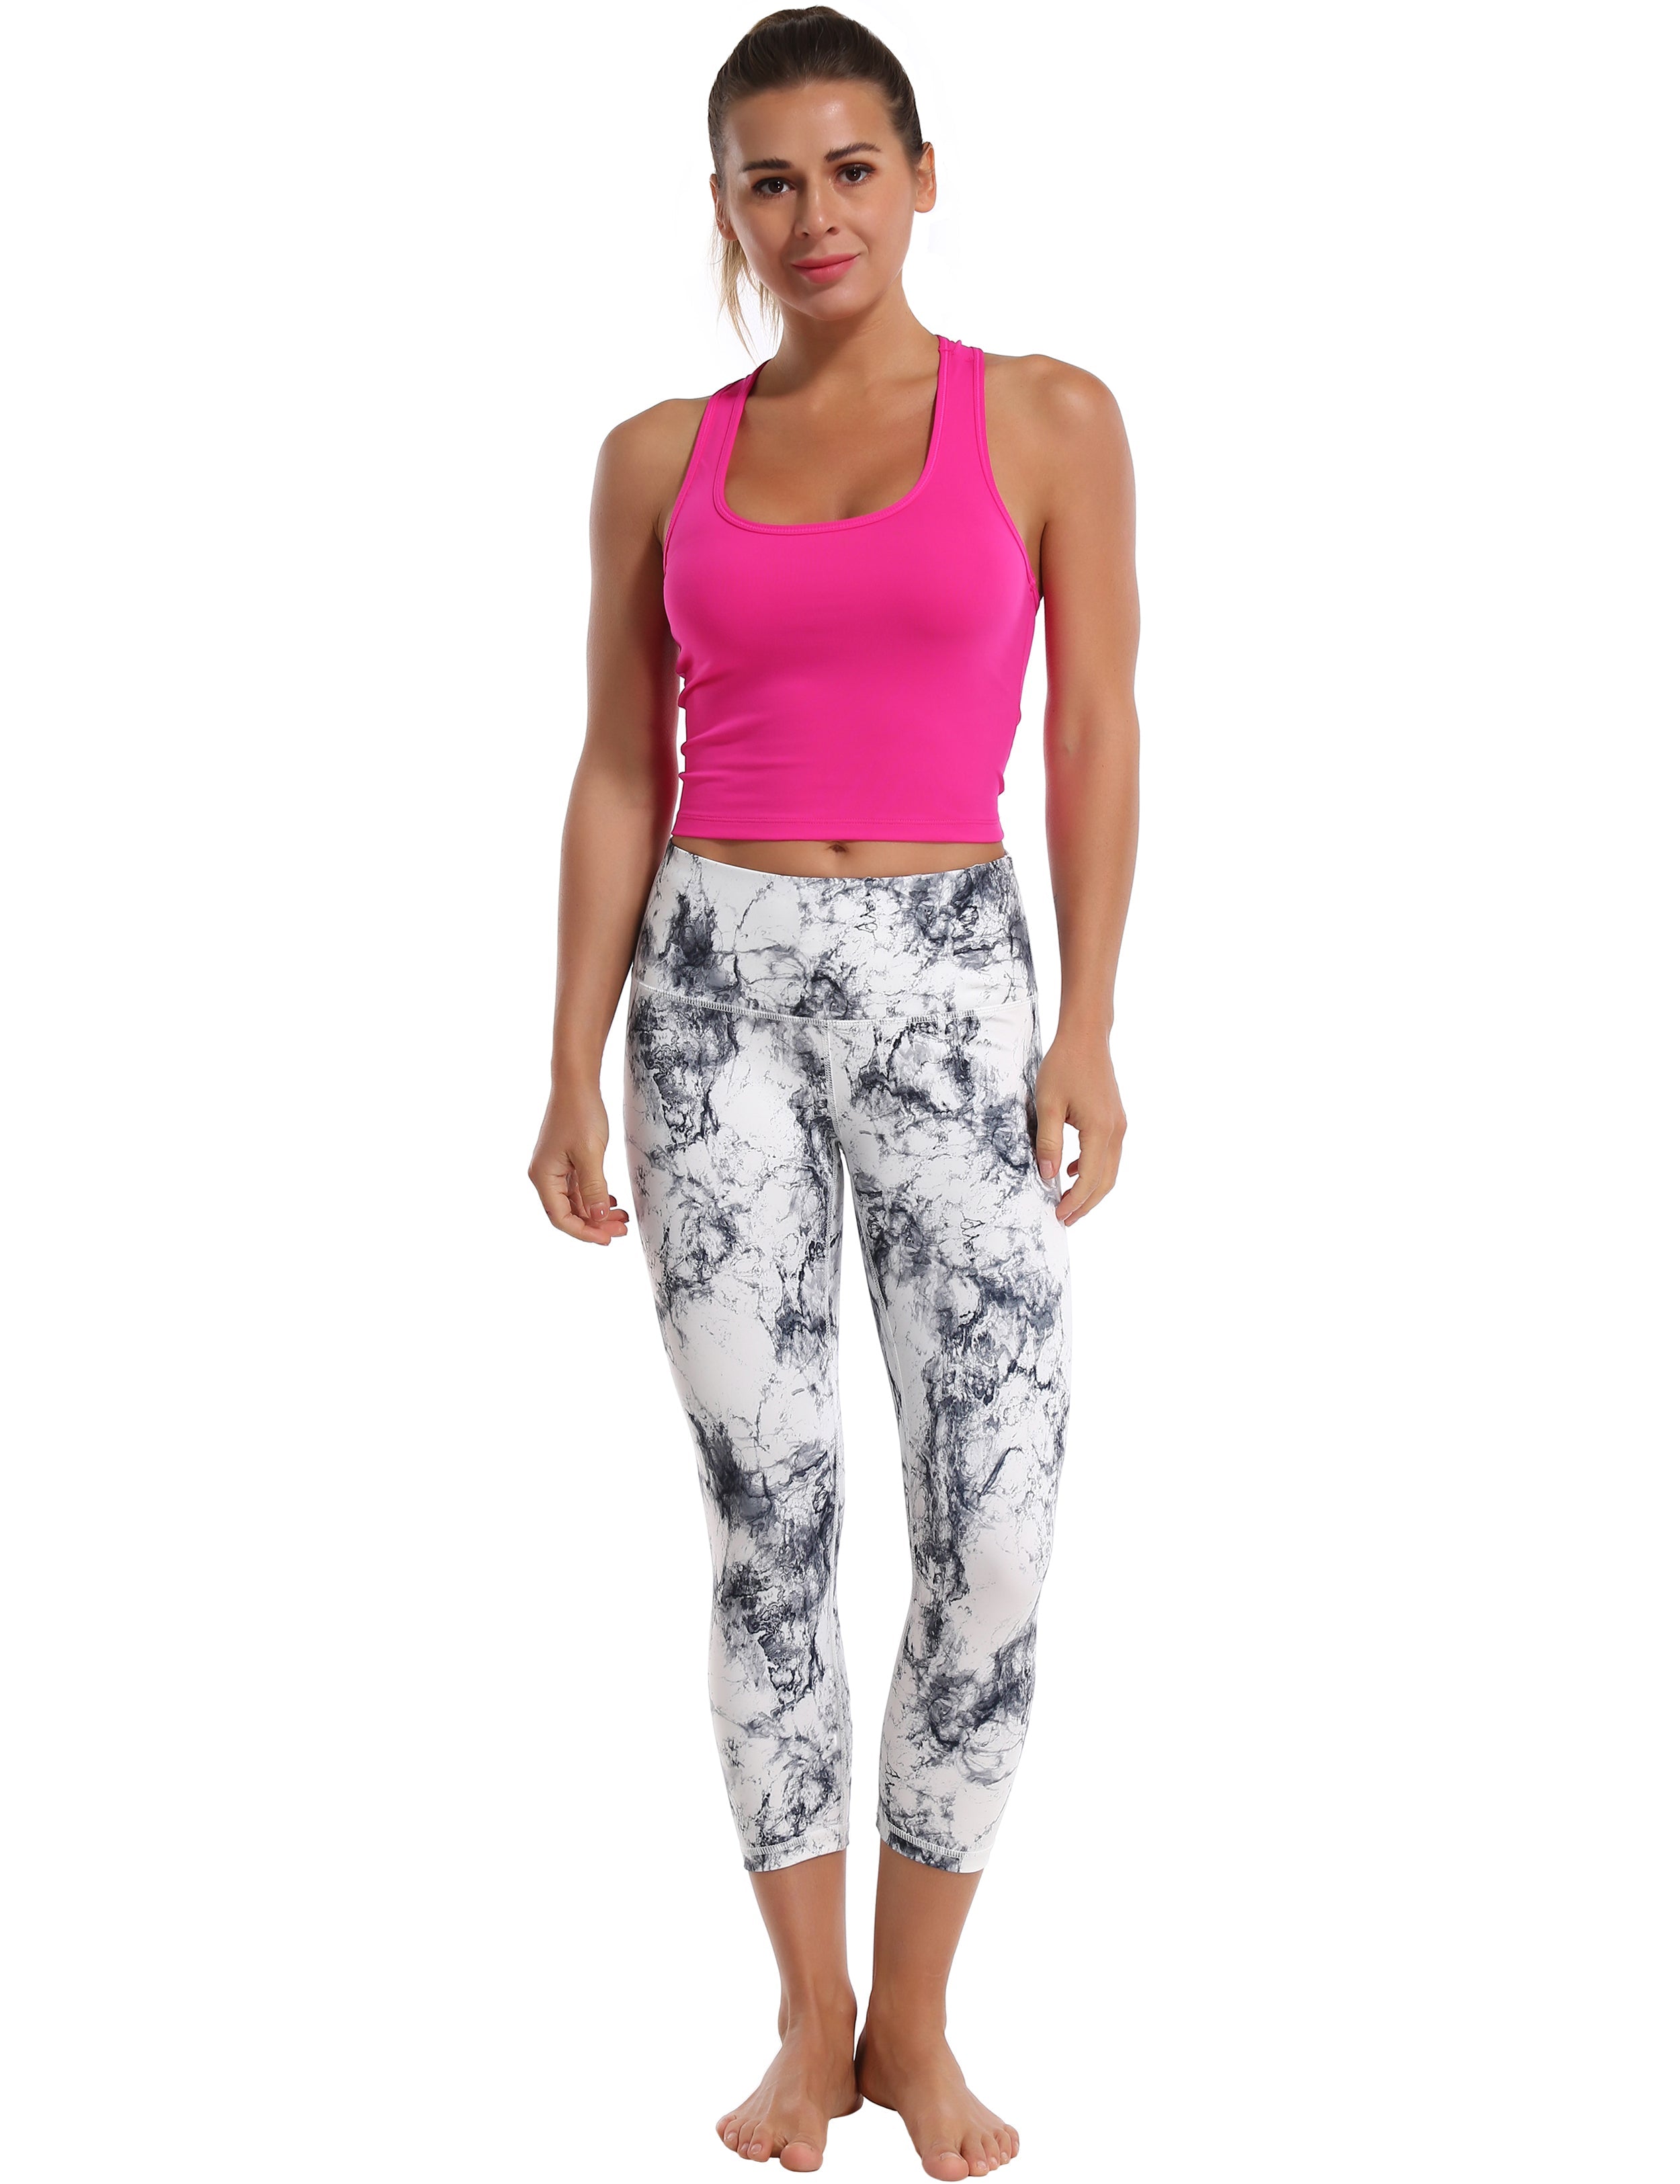 19" Printed Side Pockets Capris arabescato 75%Nylon/25%Spandex Fabric doesn't attract lint easily 4-way stretch No see-through Moisture-wicking Tummy control Inner pocket